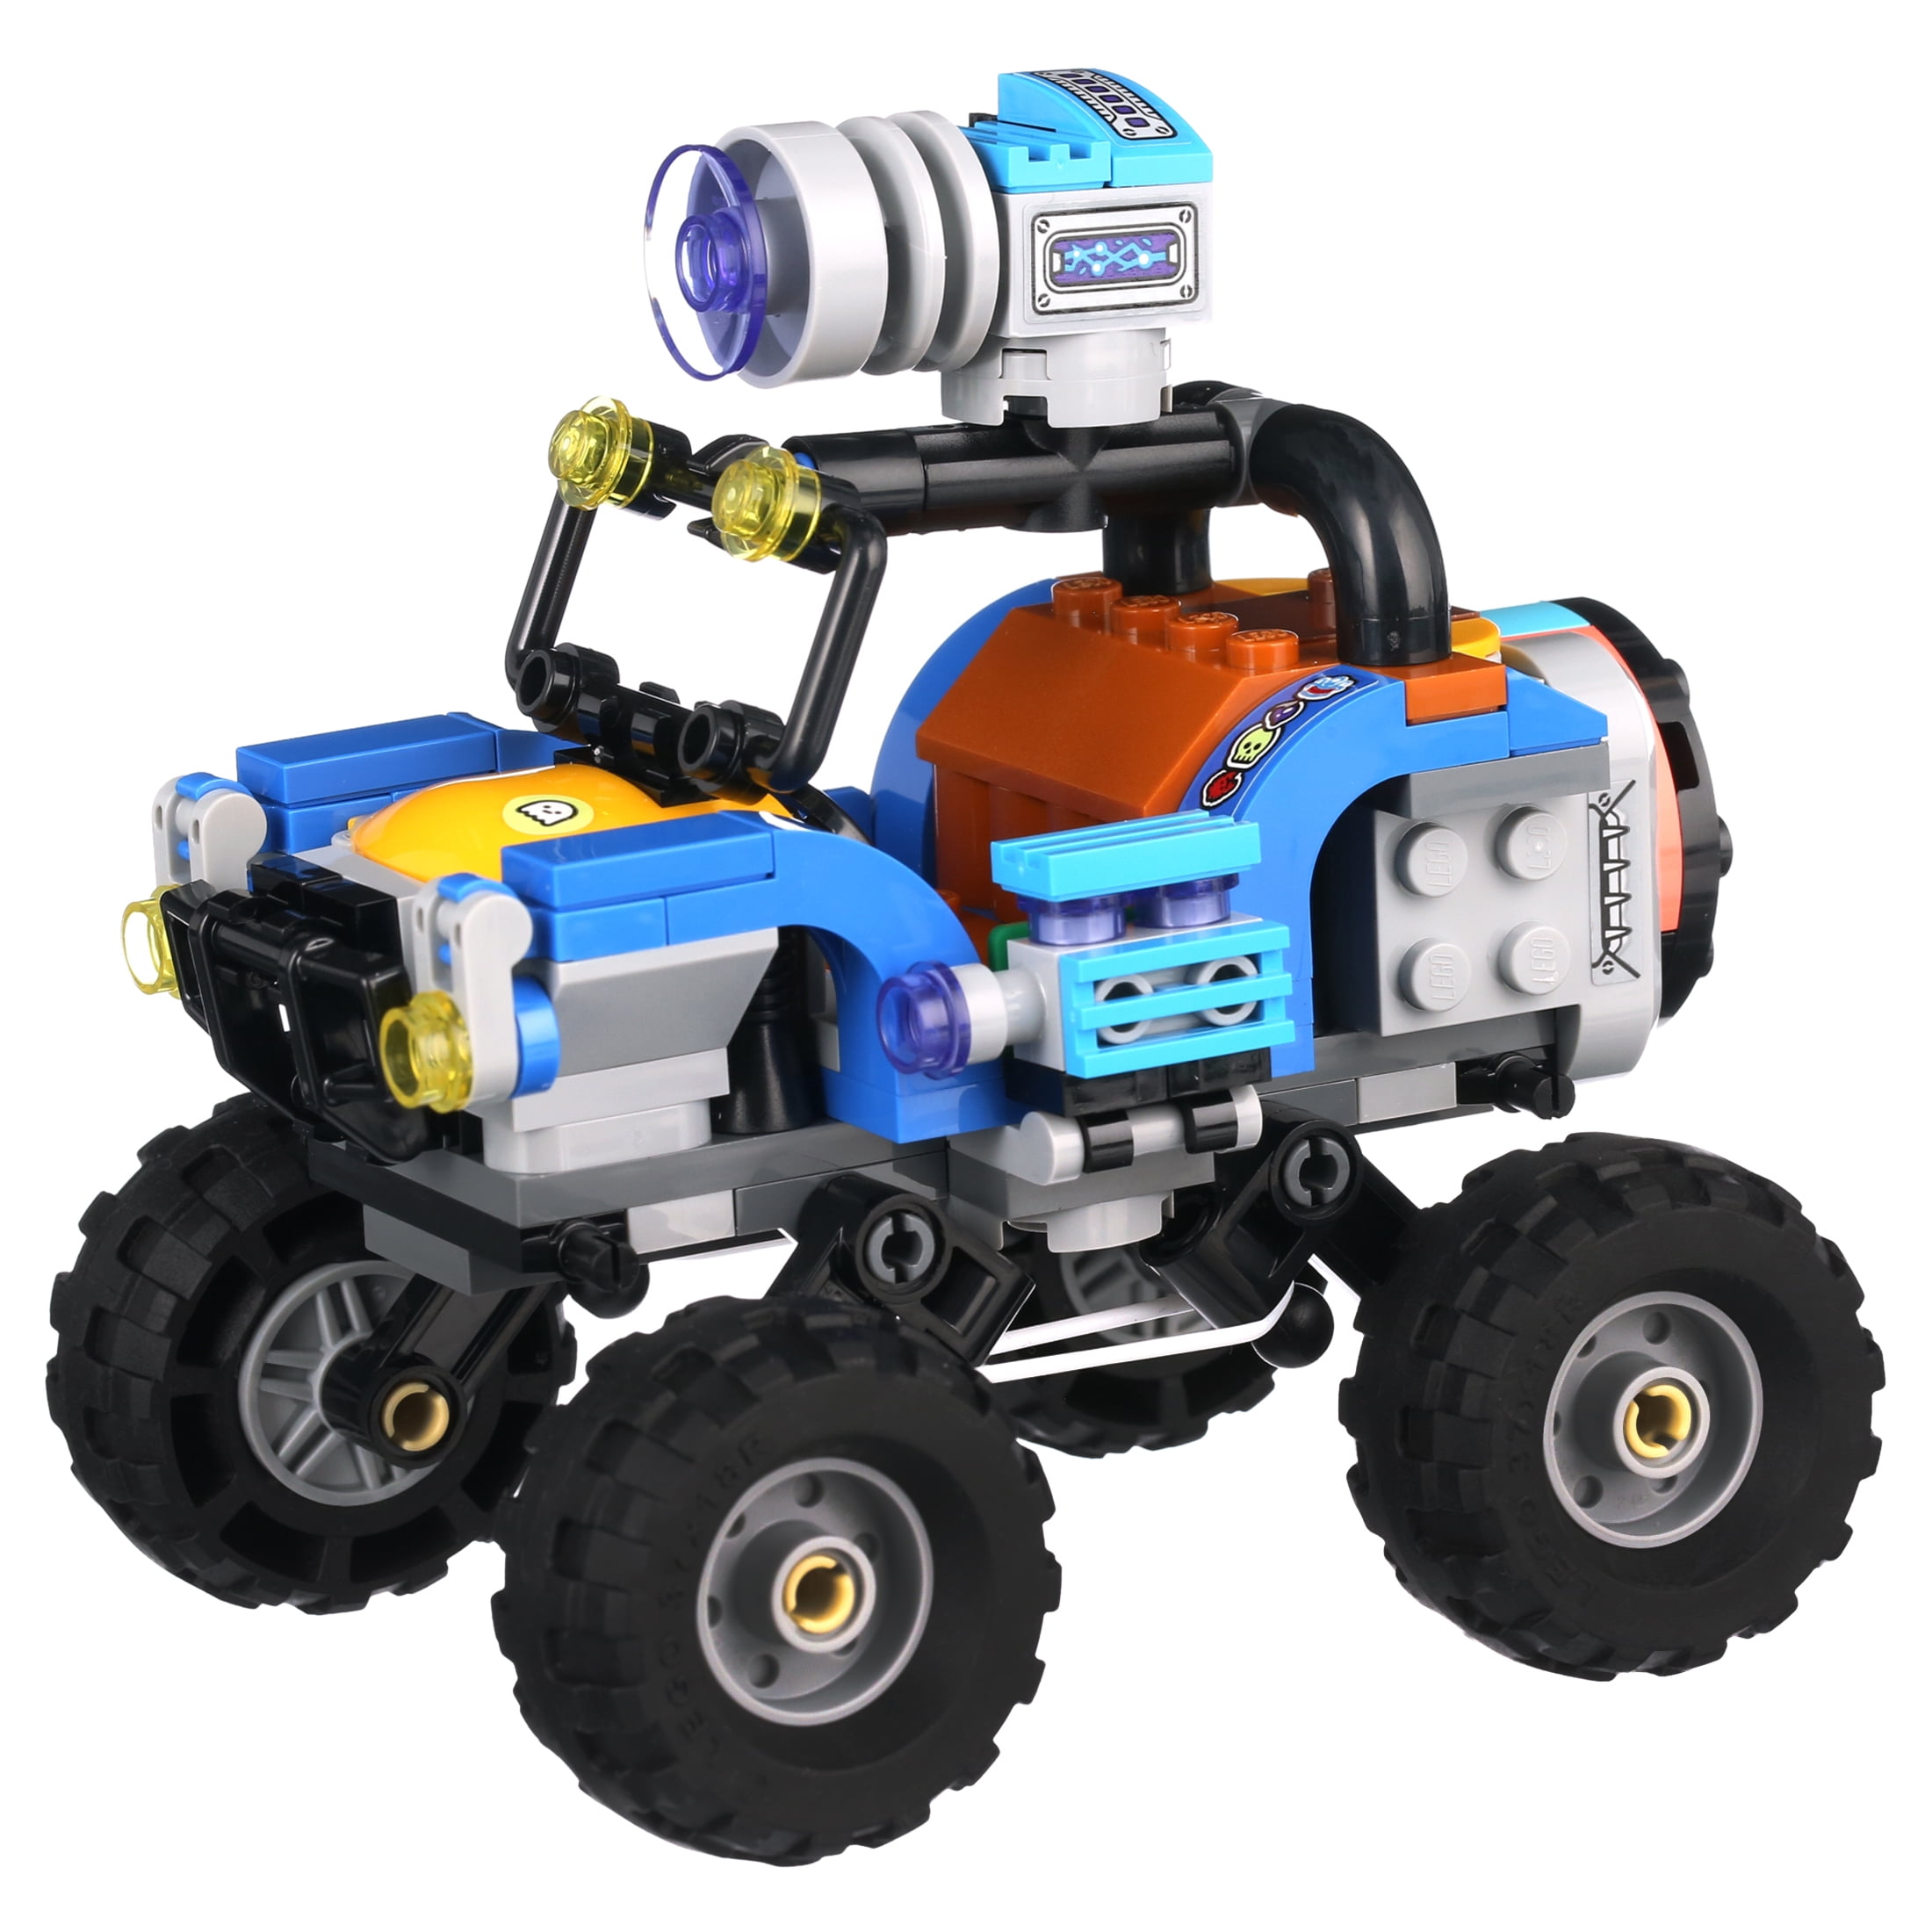 Cool Augmented Reality AR Play Experience for Kids LEGO Hidden Side Jacks Beach Buggy 70428 Popular Ghost Toy 170 Pieces New 2020 